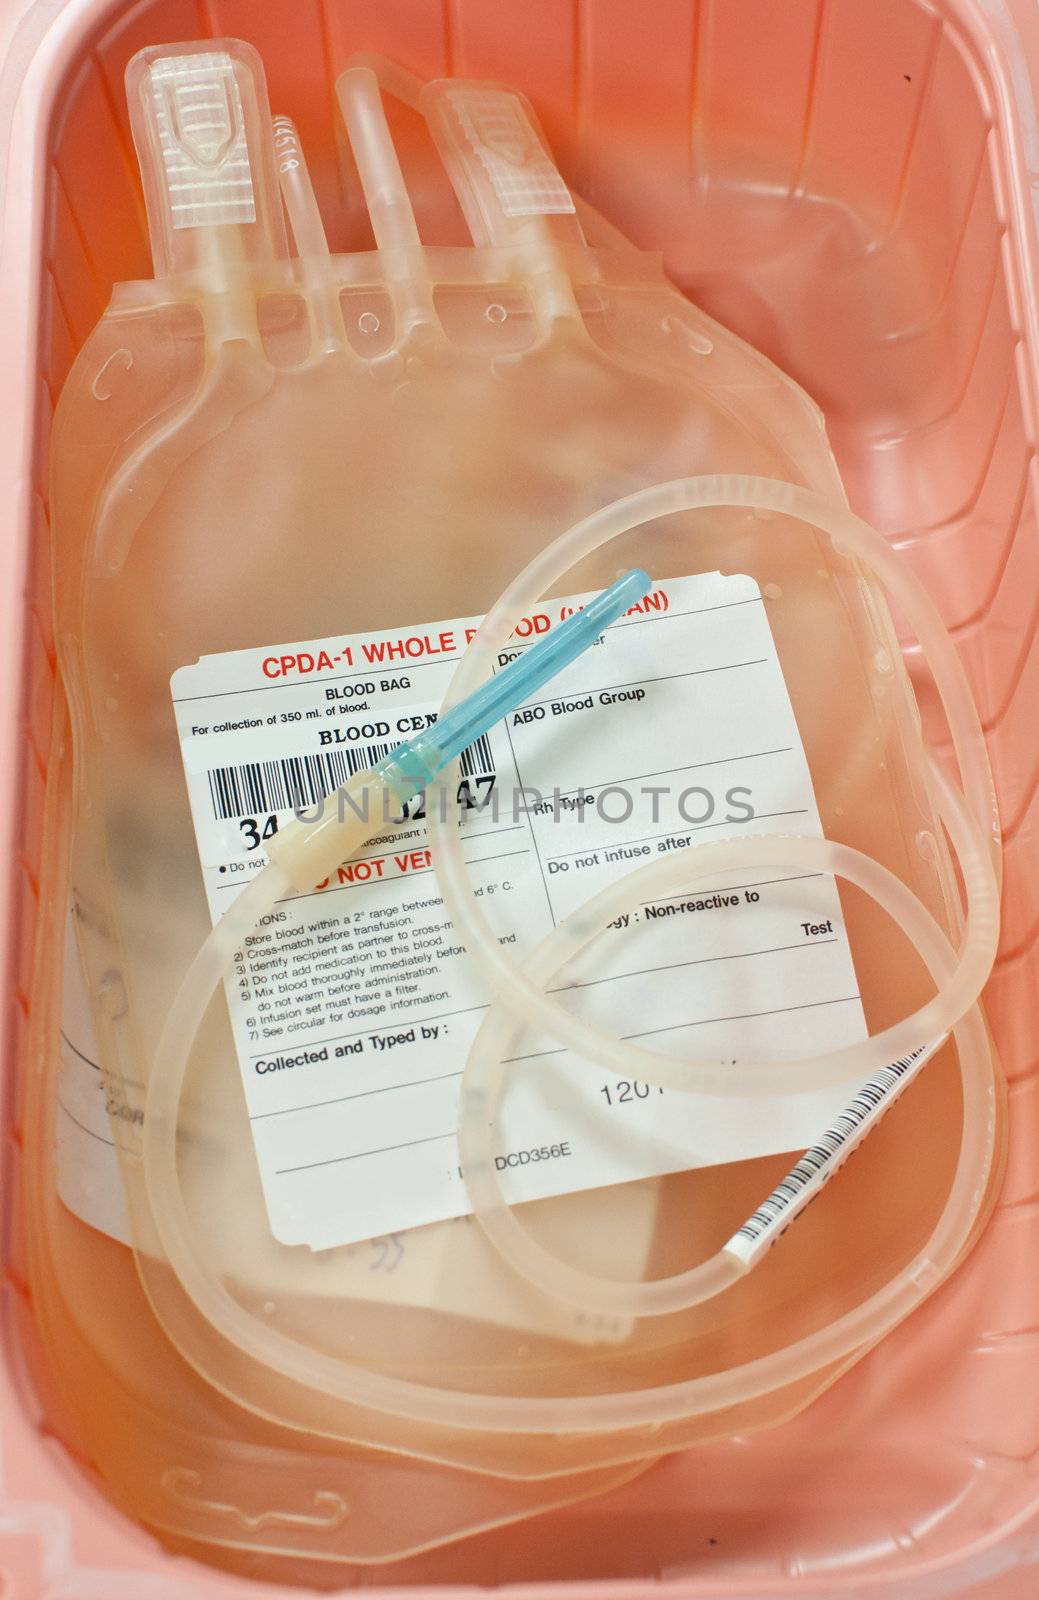 Unused blood bag ready for donate. Donating concept